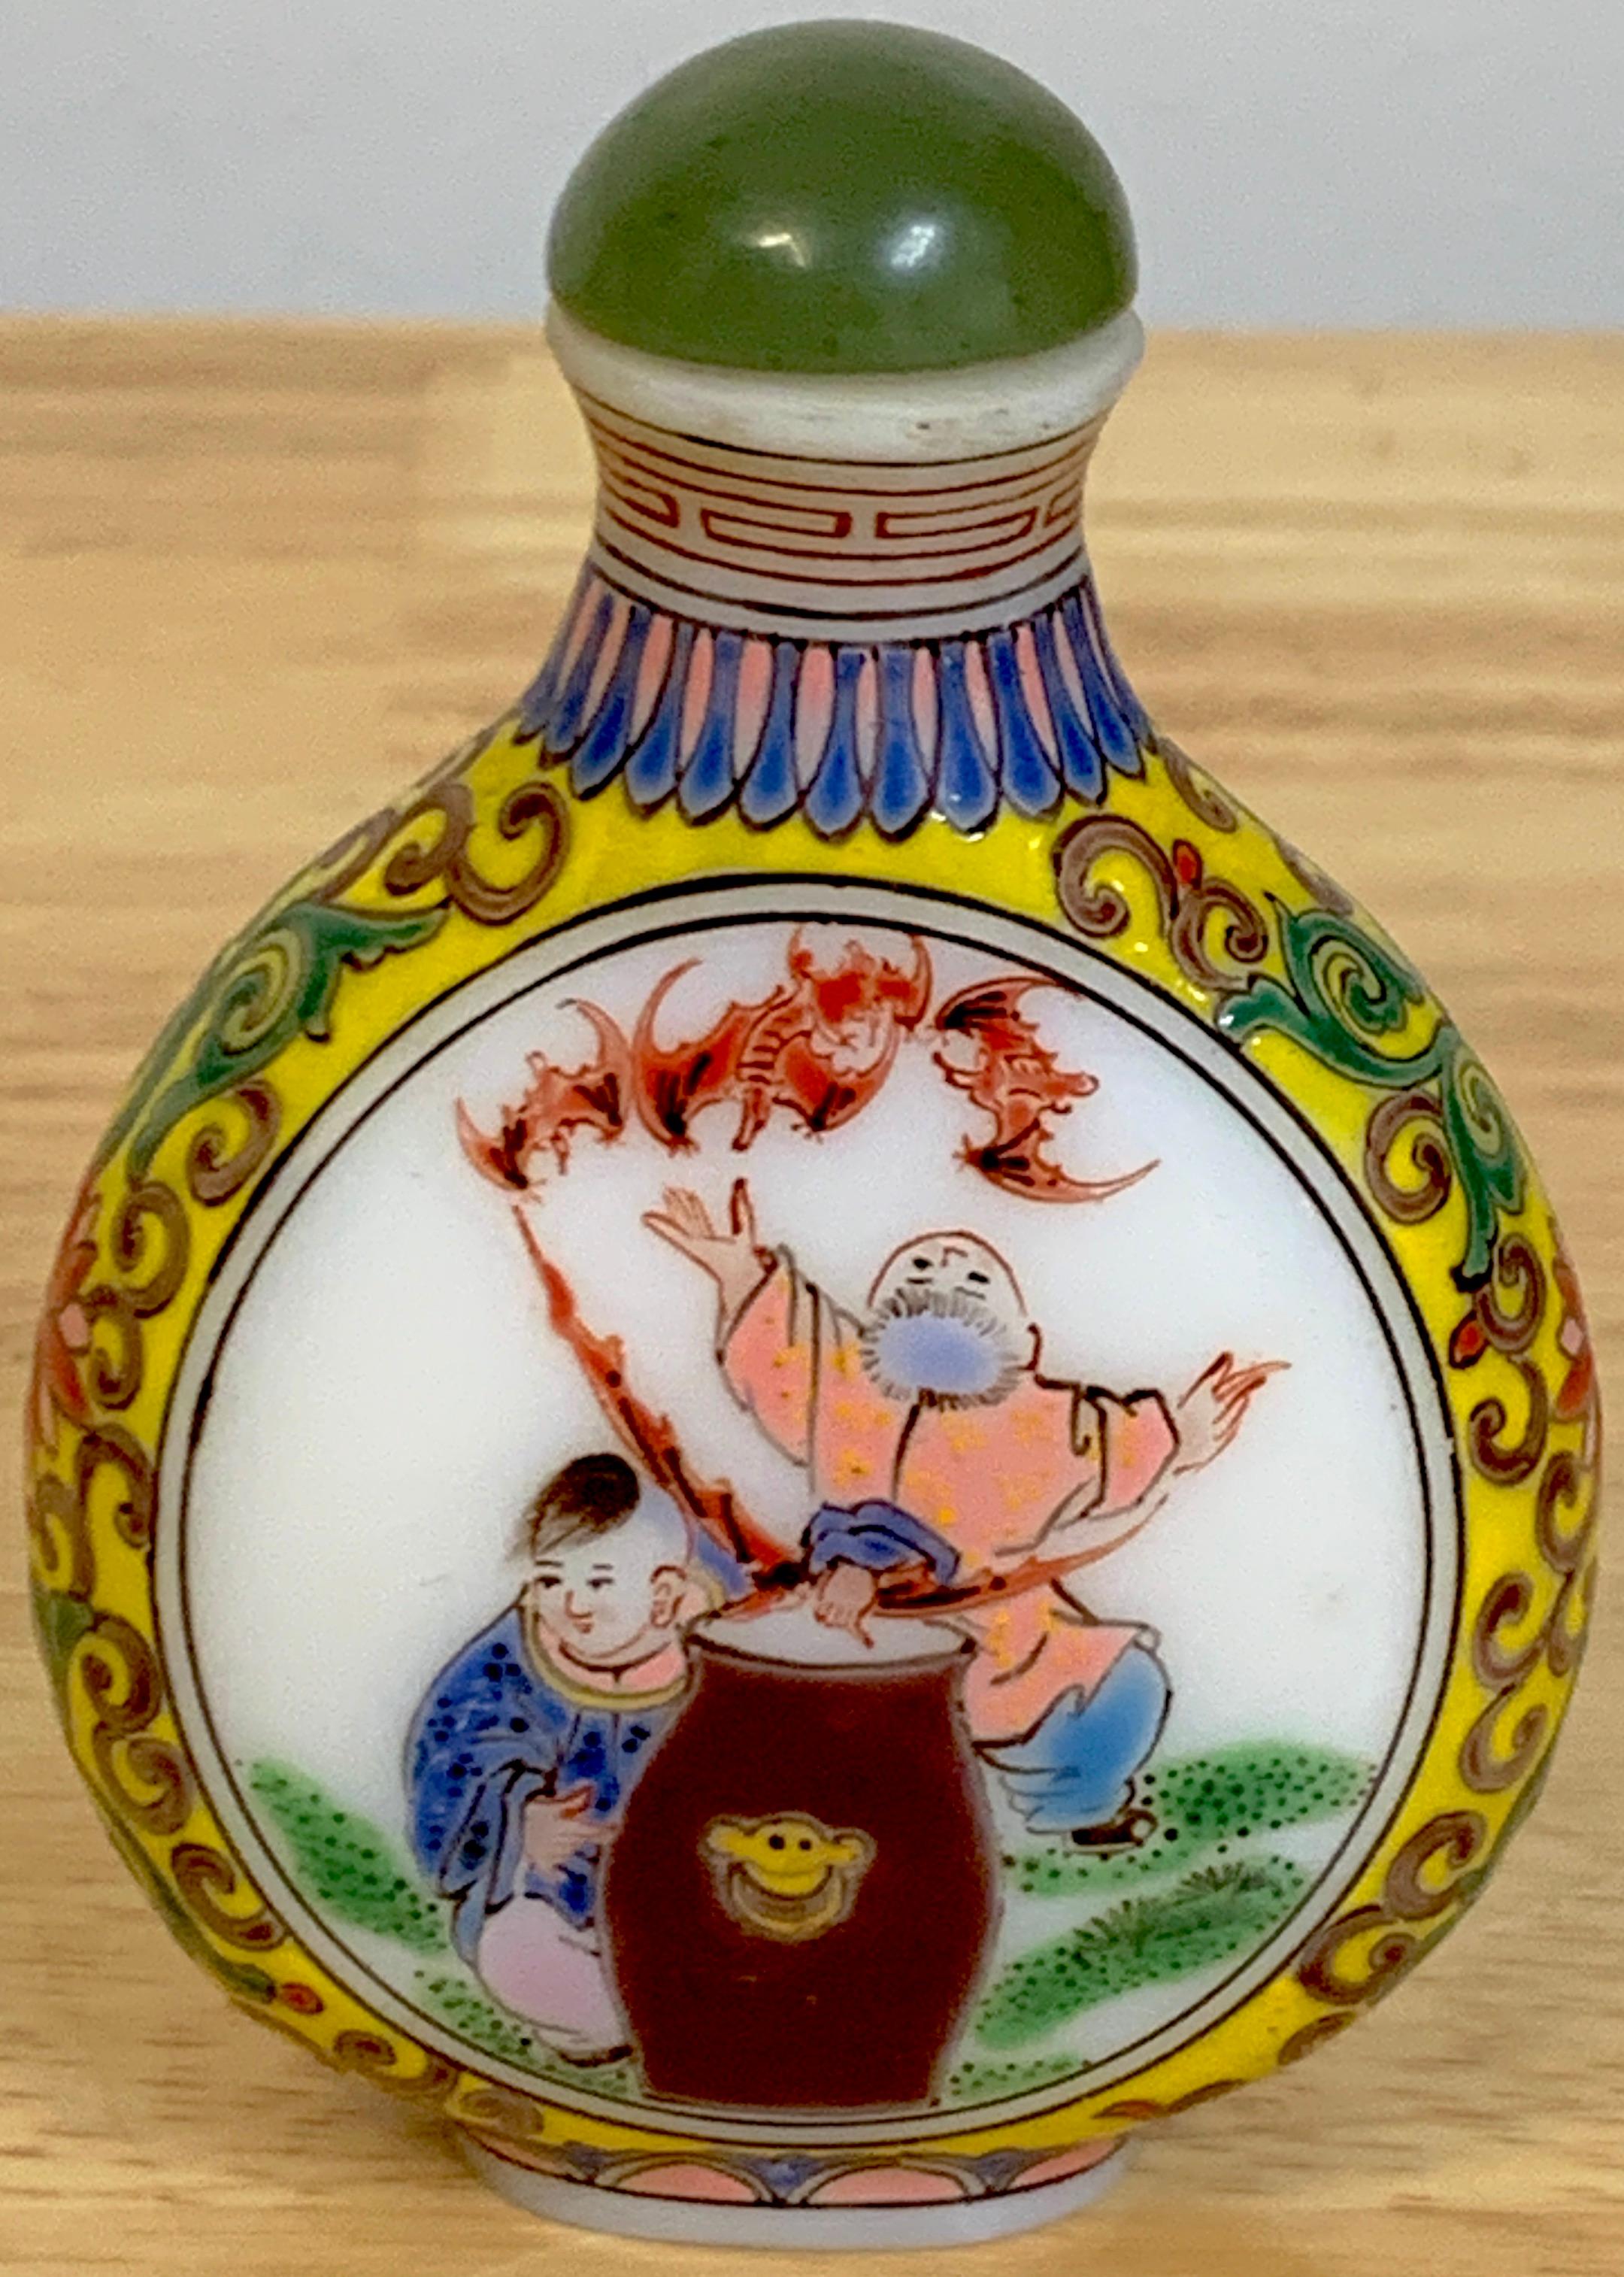 Chinese Export Jade & Peking glass enameled snuff bottle, with removable jade lid, the finely decorated moon flask shape bottle with yellow enameled sides, with two different vignettes of figures in landscape, some with bats. Signed with blue reign